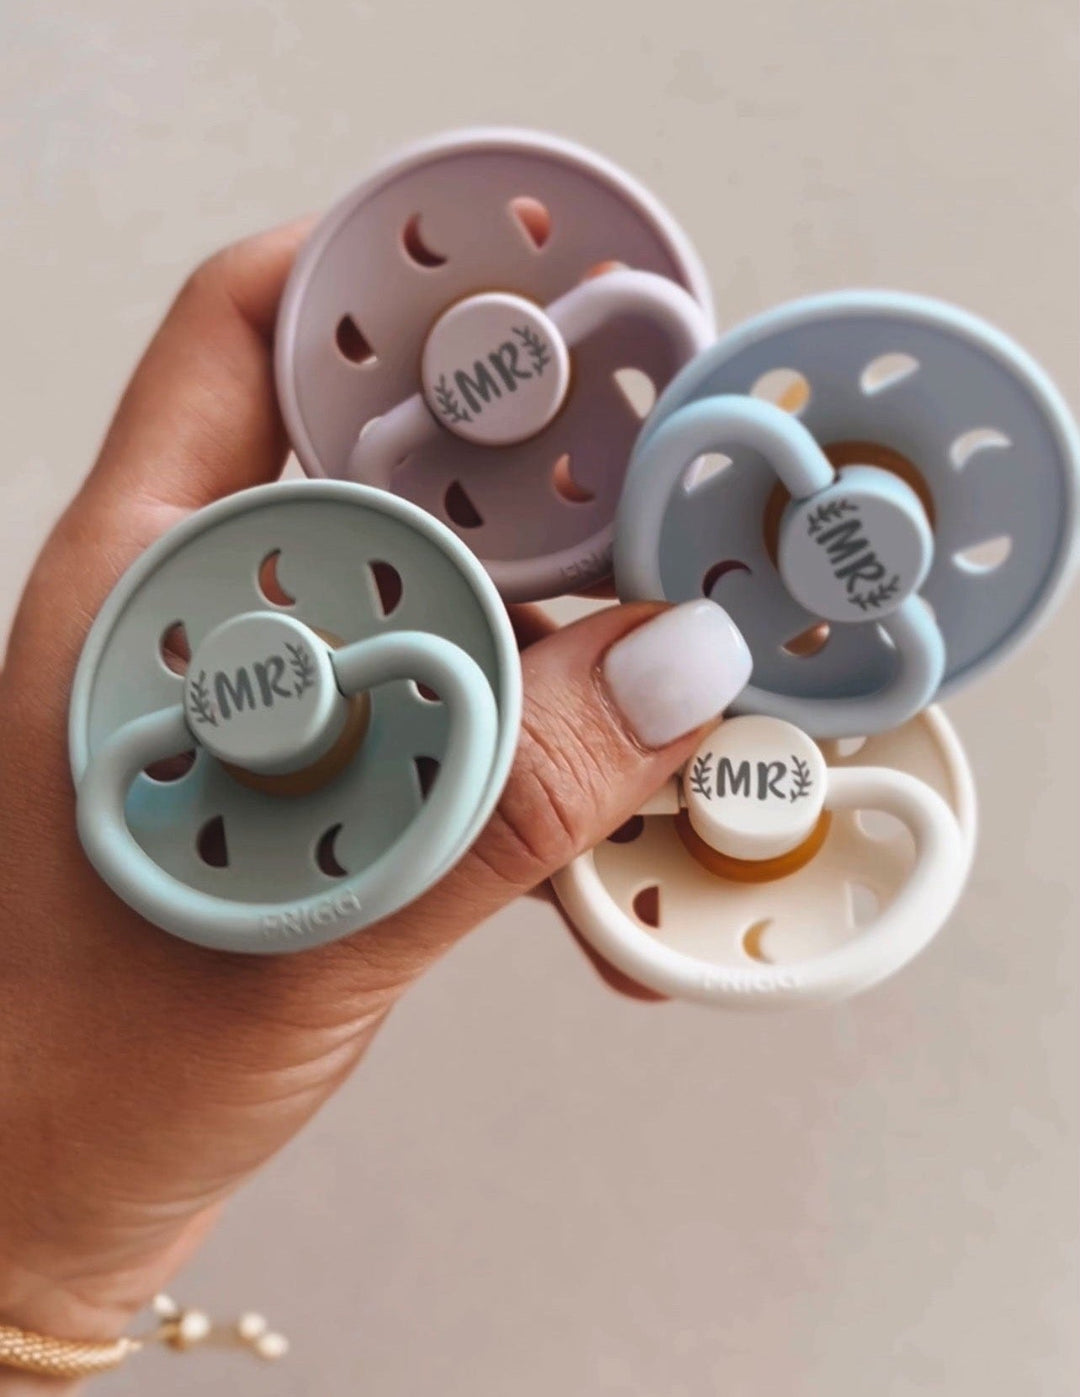 FRIGG Moon Silicone Pacifier | Personalised in Cream, sold by JBørn Baby Products Shop, Personalizable by JustBørn